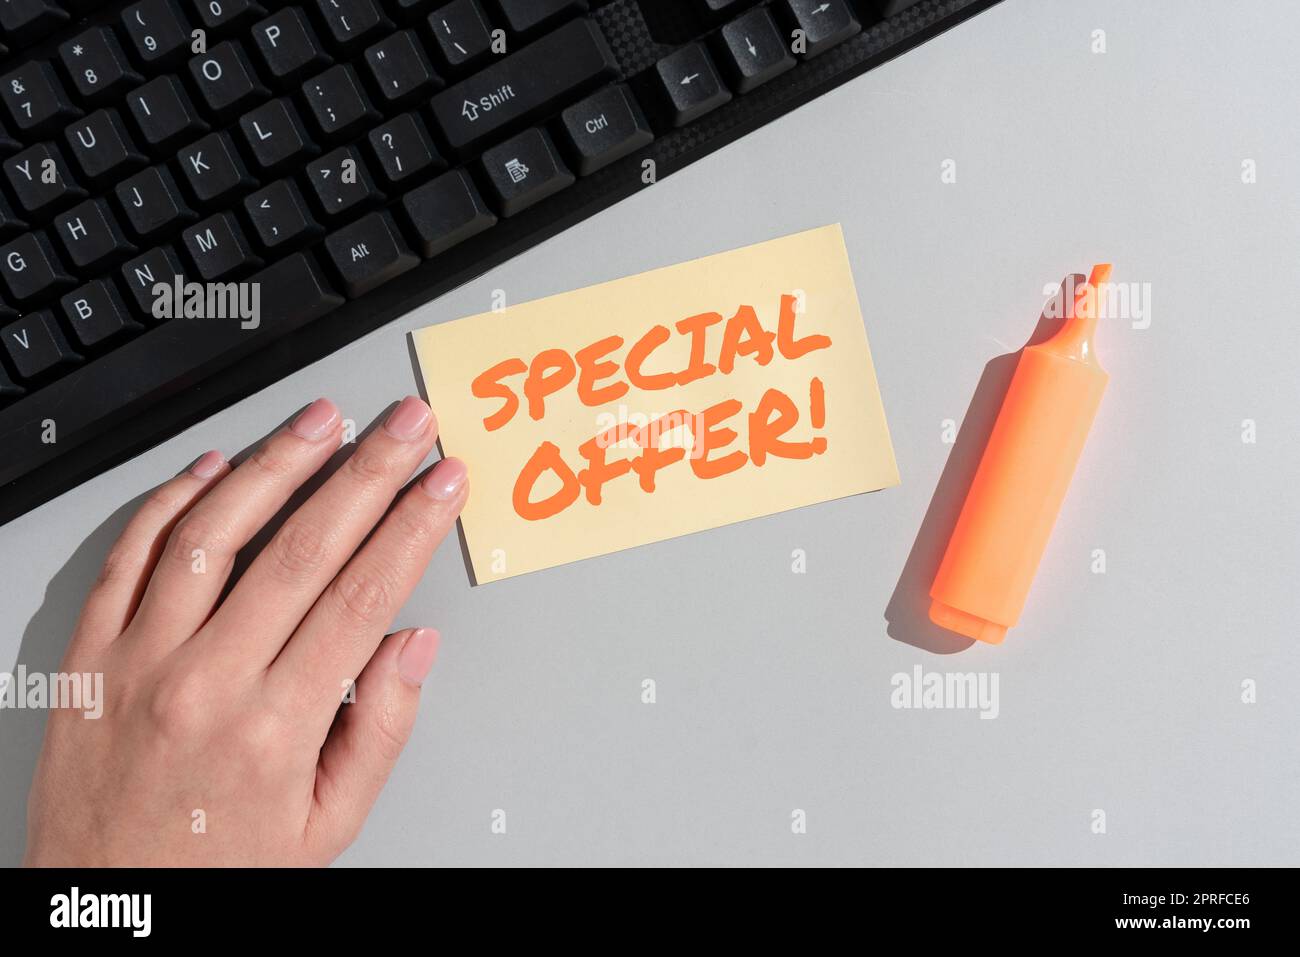 https://c8.alamy.com/comp/2PRFCE6/sign-displaying-special-offerdiscounted-price-markdown-promotional-items-crazy-sale-word-written-on-discounted-price-markdown-promotional-items-crazy-sale-businessman-holding-tablet-and-presenting-with-other-hand-important-message-2PRFCE6.jpg